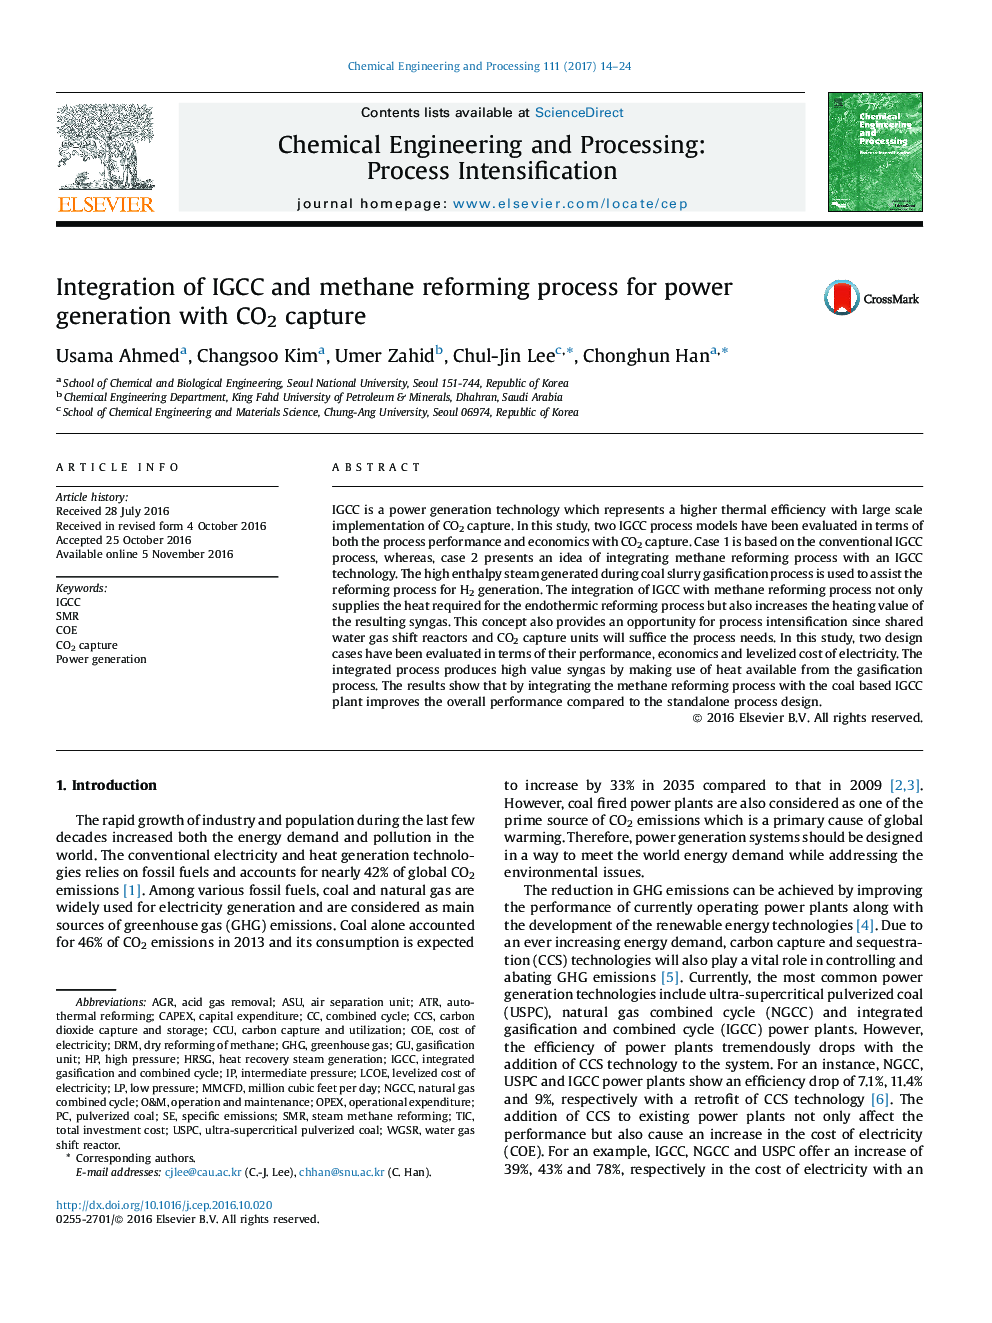 Integration of IGCC and methane reforming process for power generation with CO2 capture